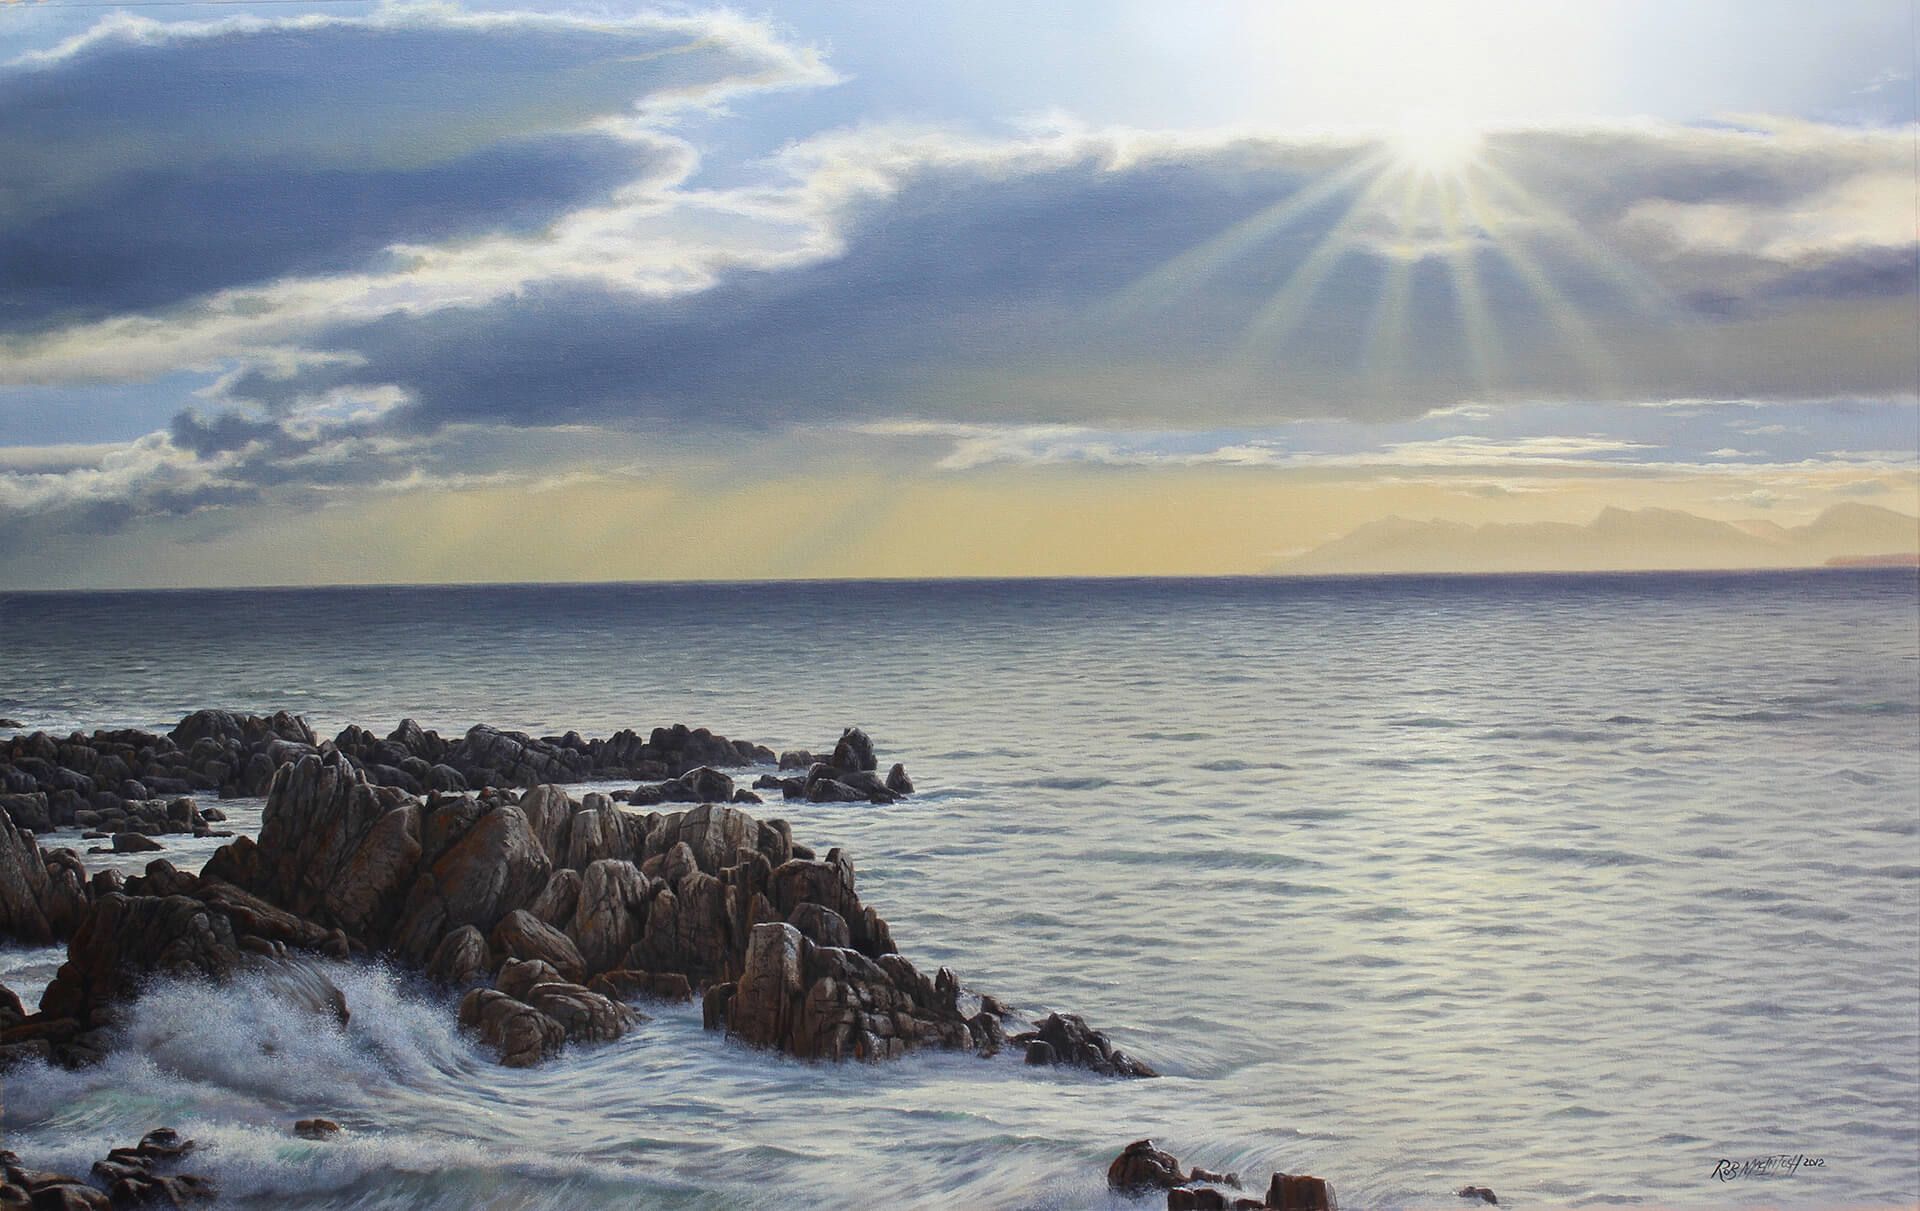 Photorealistic painting of sunlight shining through clouds over a rocky beach